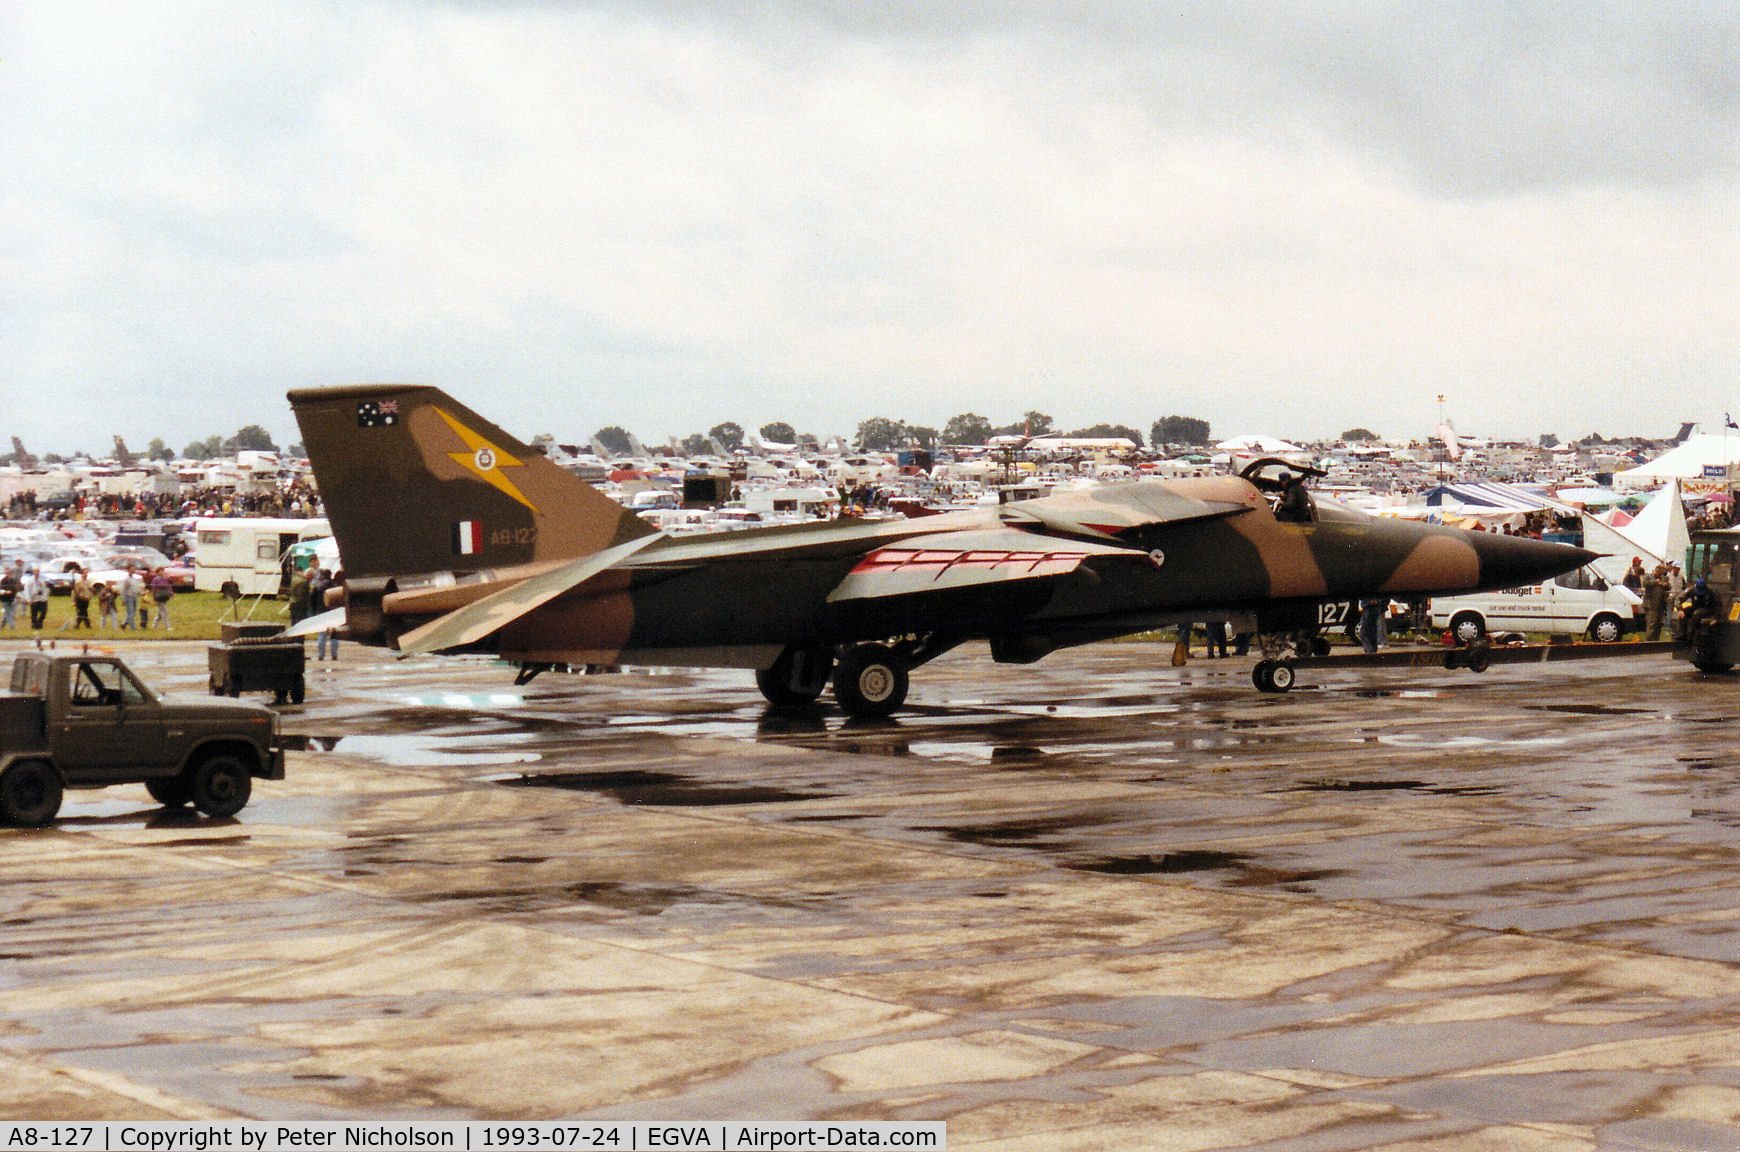 A8-127, 1967 General Dynamics F-111C Aardvark C/N D1-03, F-111C of 1 Squadron Royal Australian Air Force on the flight-line at the 1993 Intnl Air Tattoo at RAF Fairford.